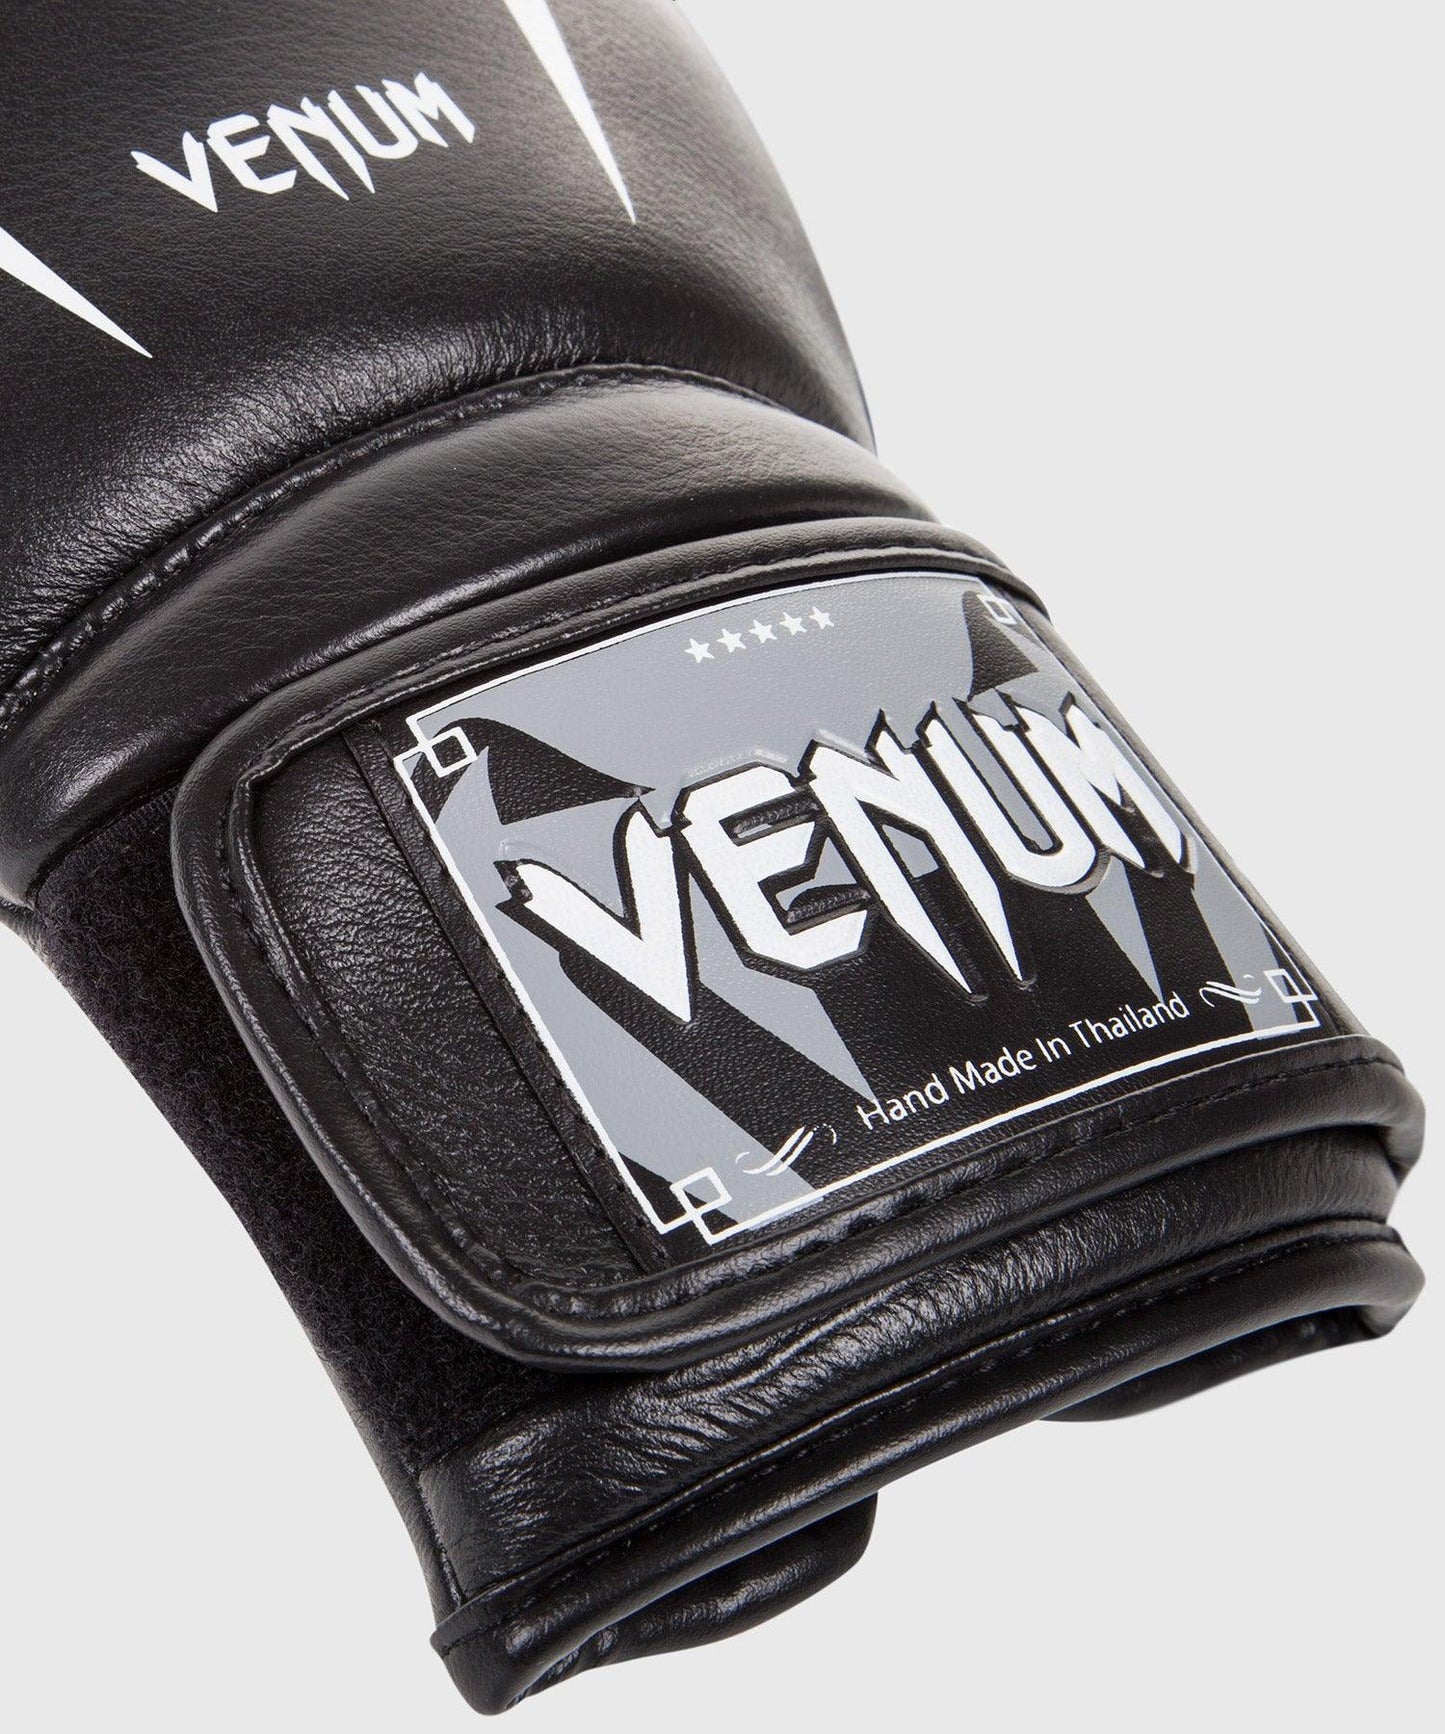 Venum Giant 3.0 Boxing Gloves - Nappa Leather - Black Picture 4